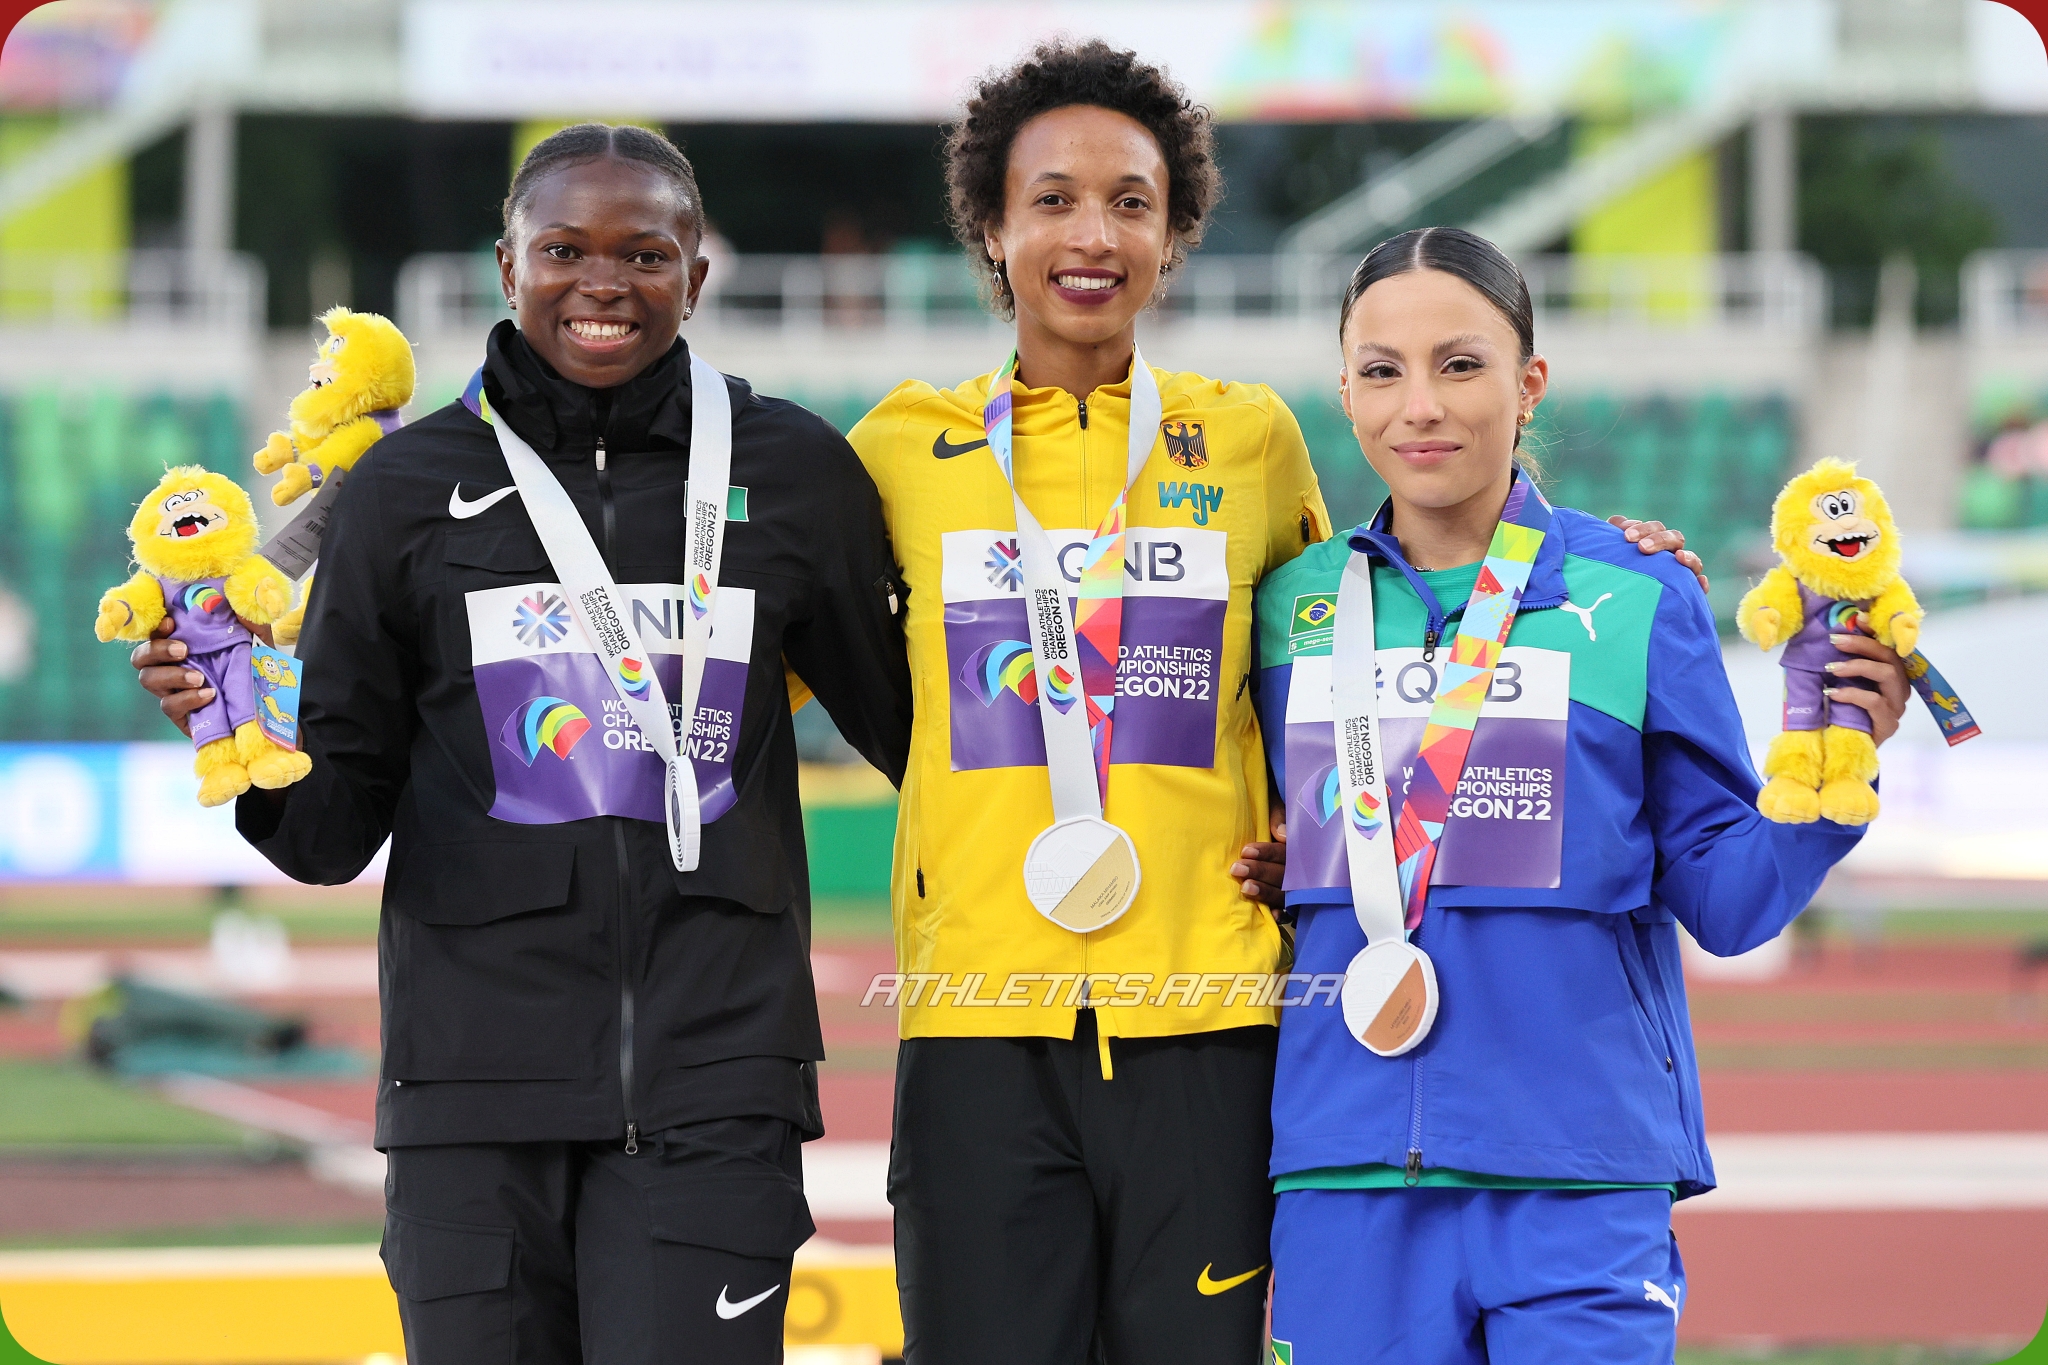 Silver medalist Ese Brume of Team Nigeria, gold medalist Malaika Mihambo of Team Germany, and bronze medalist Leticia Oro Melo of Team Brazil pose during the medal ceremony for the Women's Long Jump on day ten of the World Athletics Championships Oregon22 at Hayward Field on July 24, 2022 in Eugene, Oregon. (Photo by Andy Lyons/Getty Images for World Athletics)